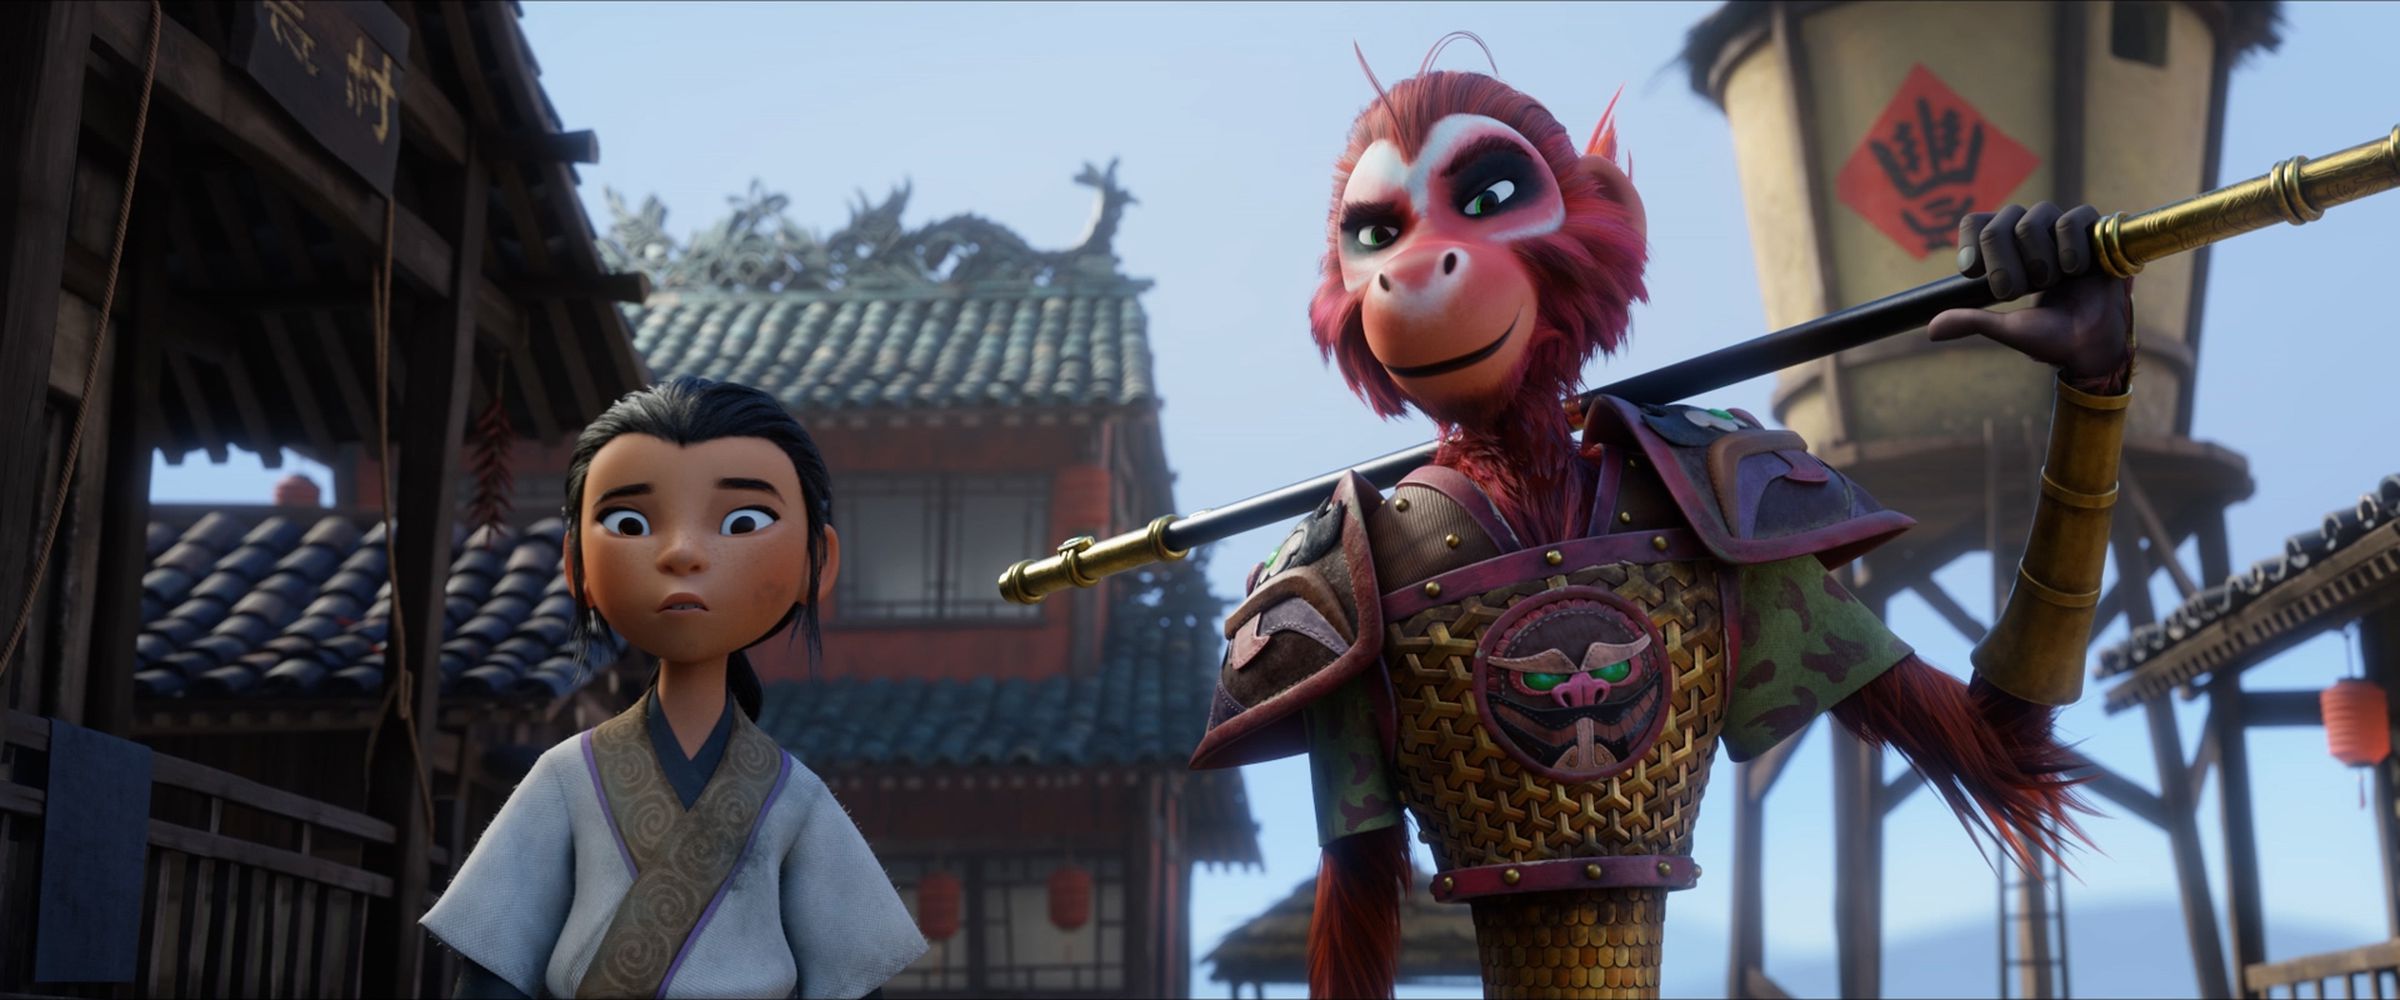 A still image from the animated Netflix film The Monkey King.